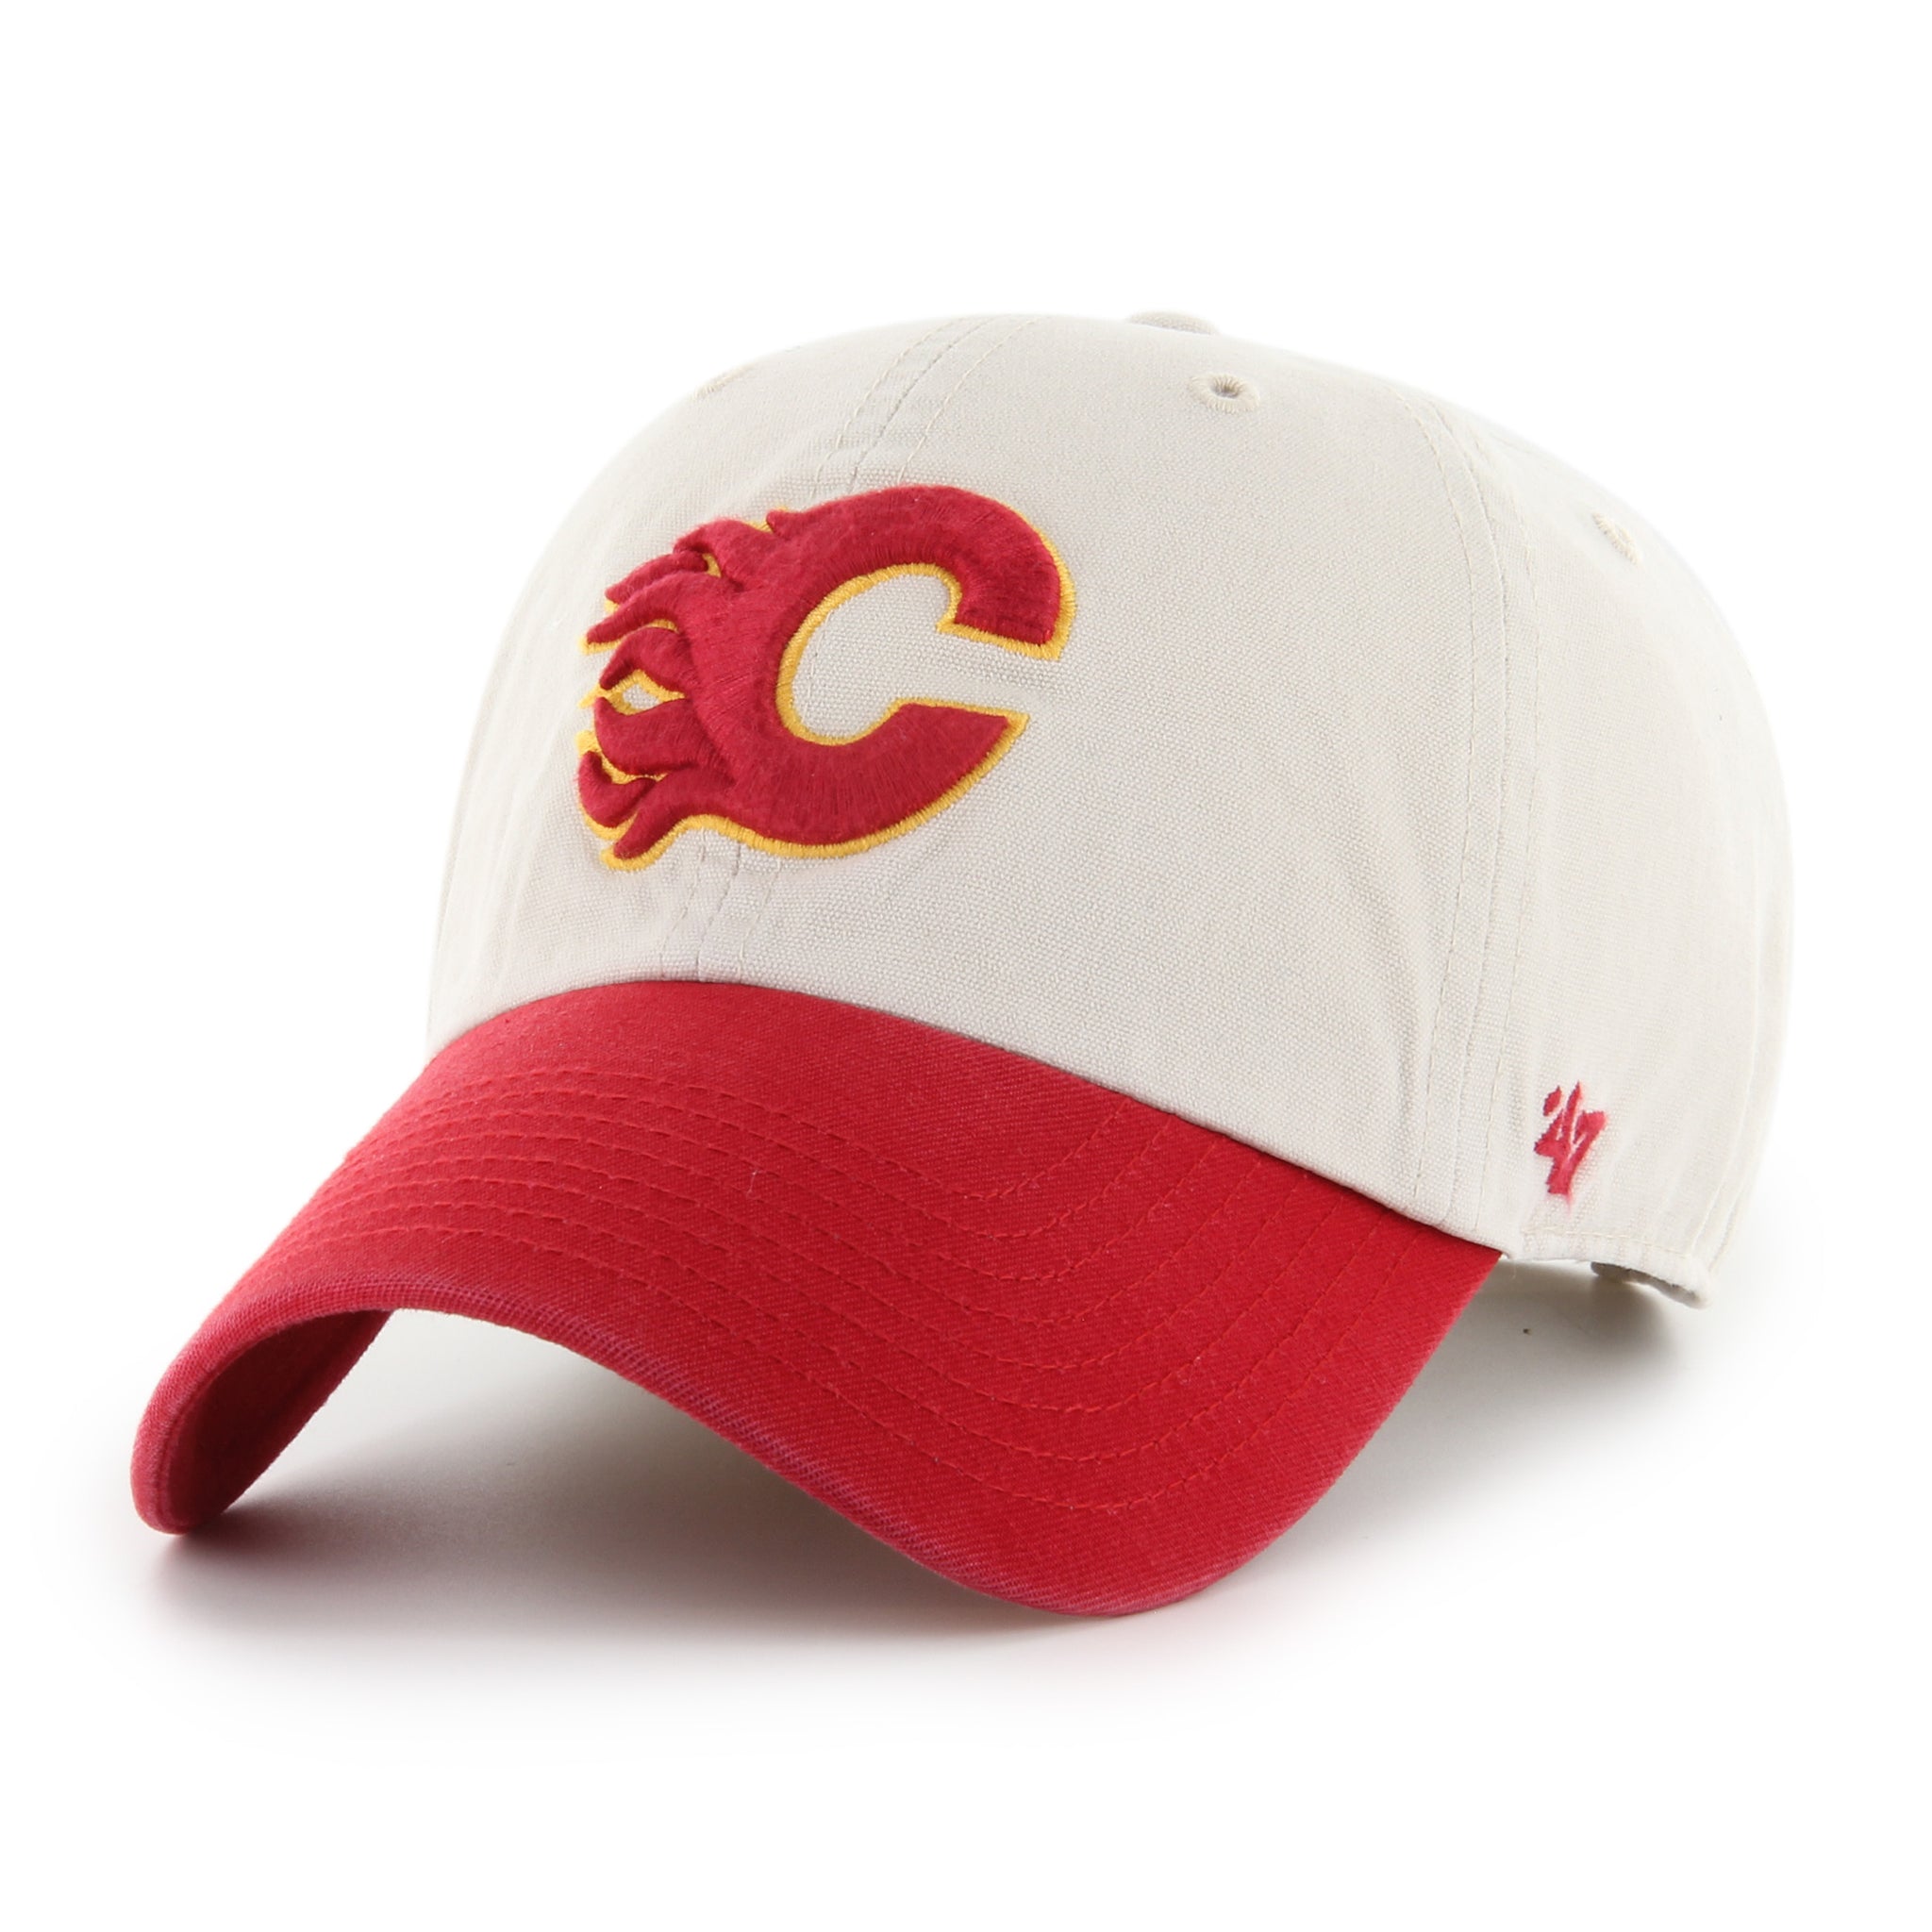 Men's Calgary Flames Sidestep Clean up Adjustable Hat Cap One Size